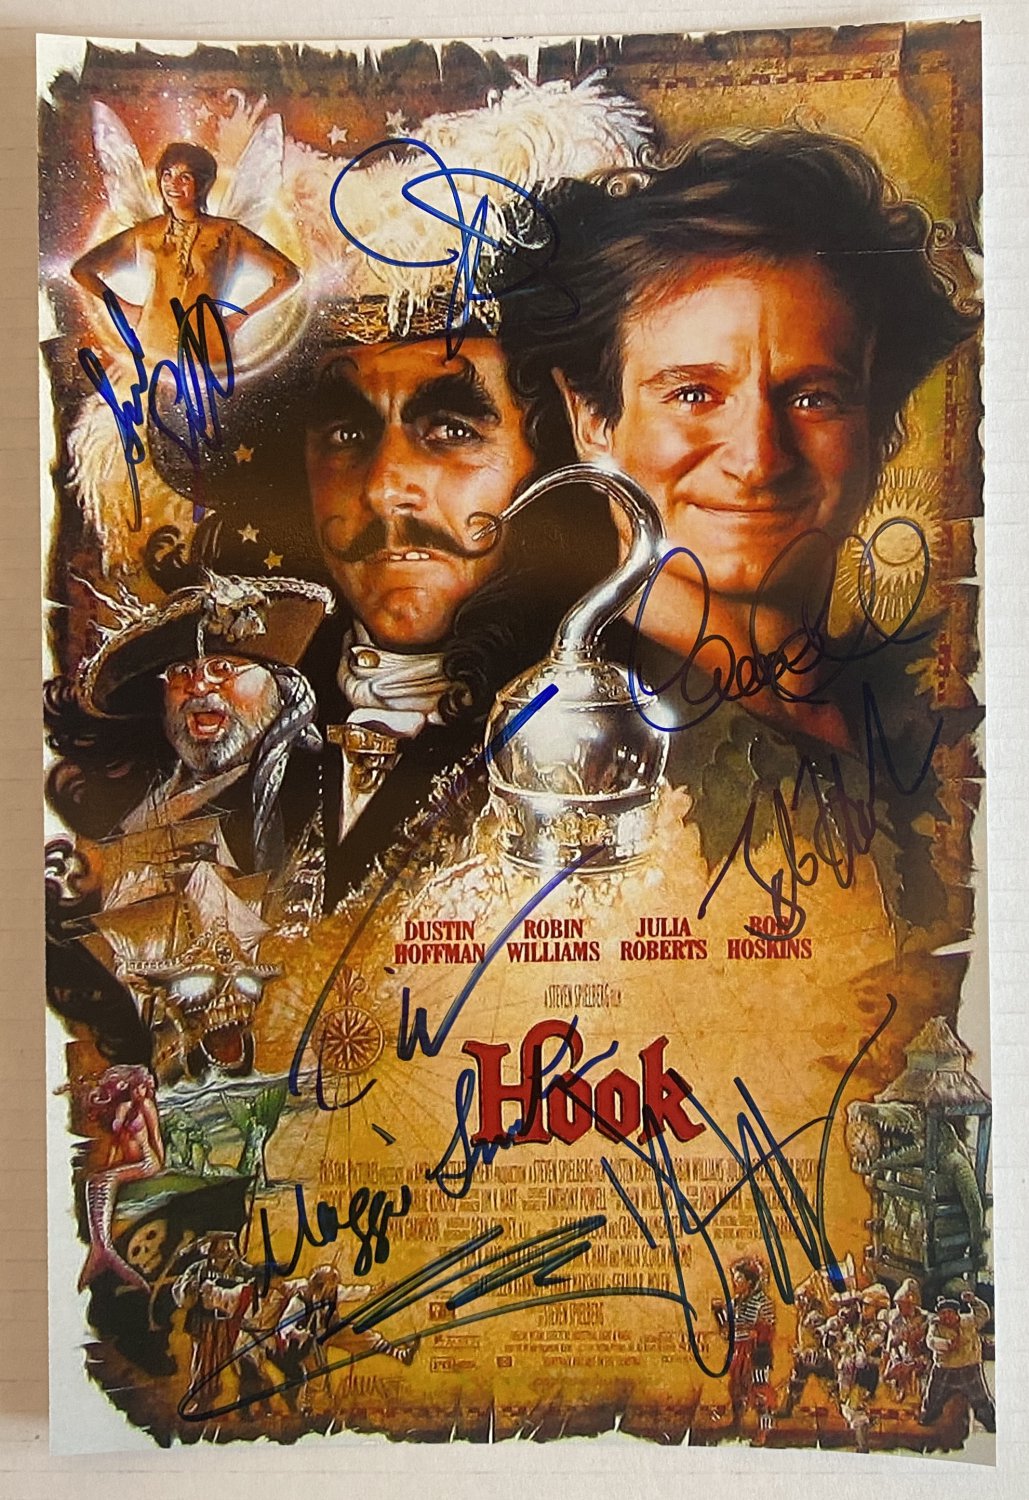 HOOK cast signed autographed 8x12 photo Robin Williams Dustin Hoffman photograph